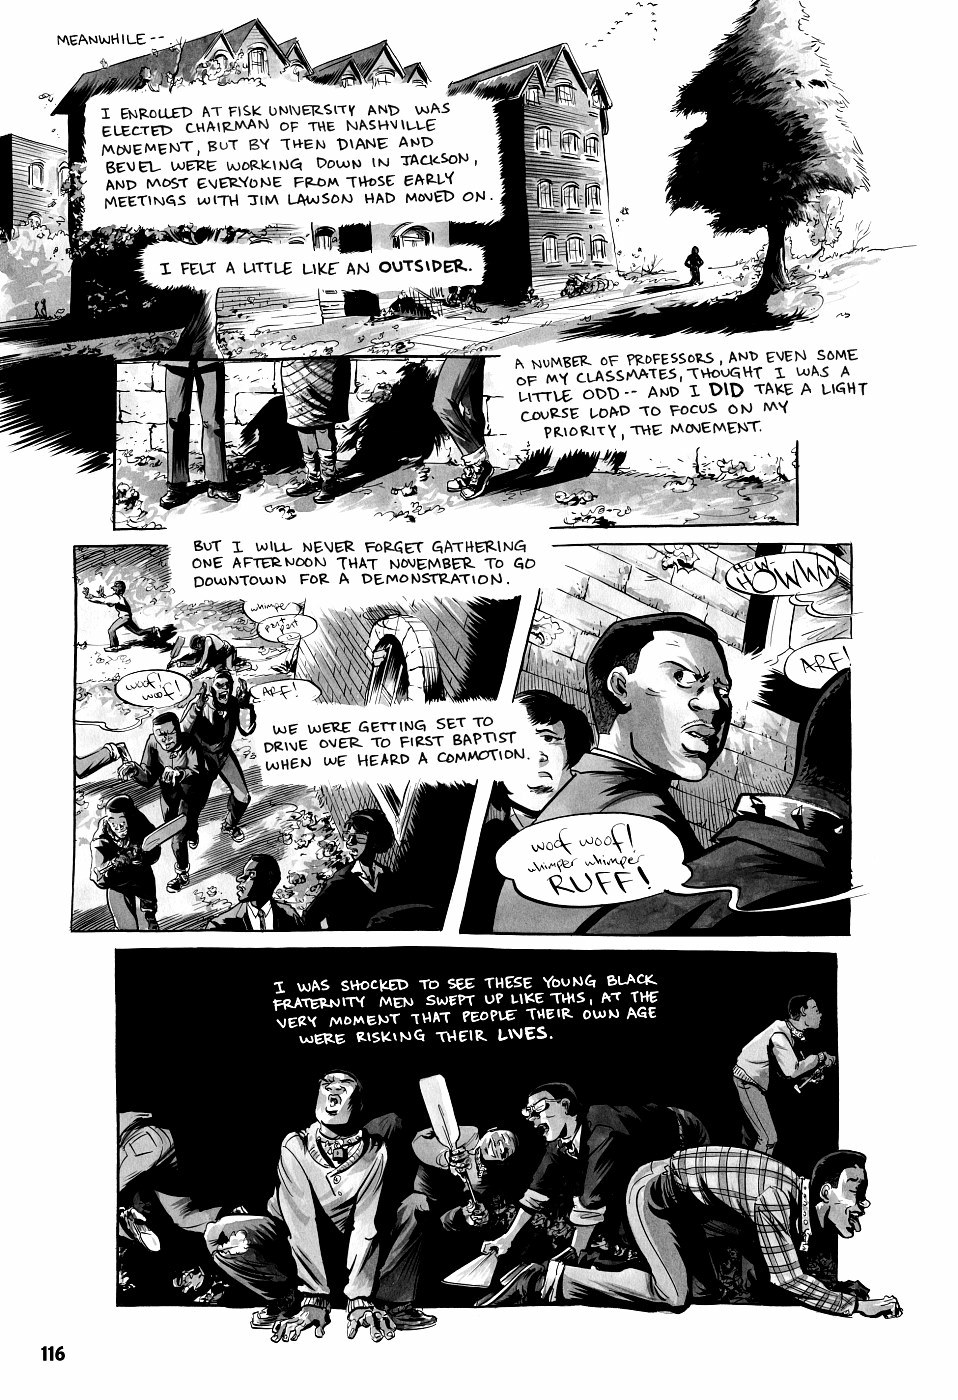 page 116 march book two graphic novel